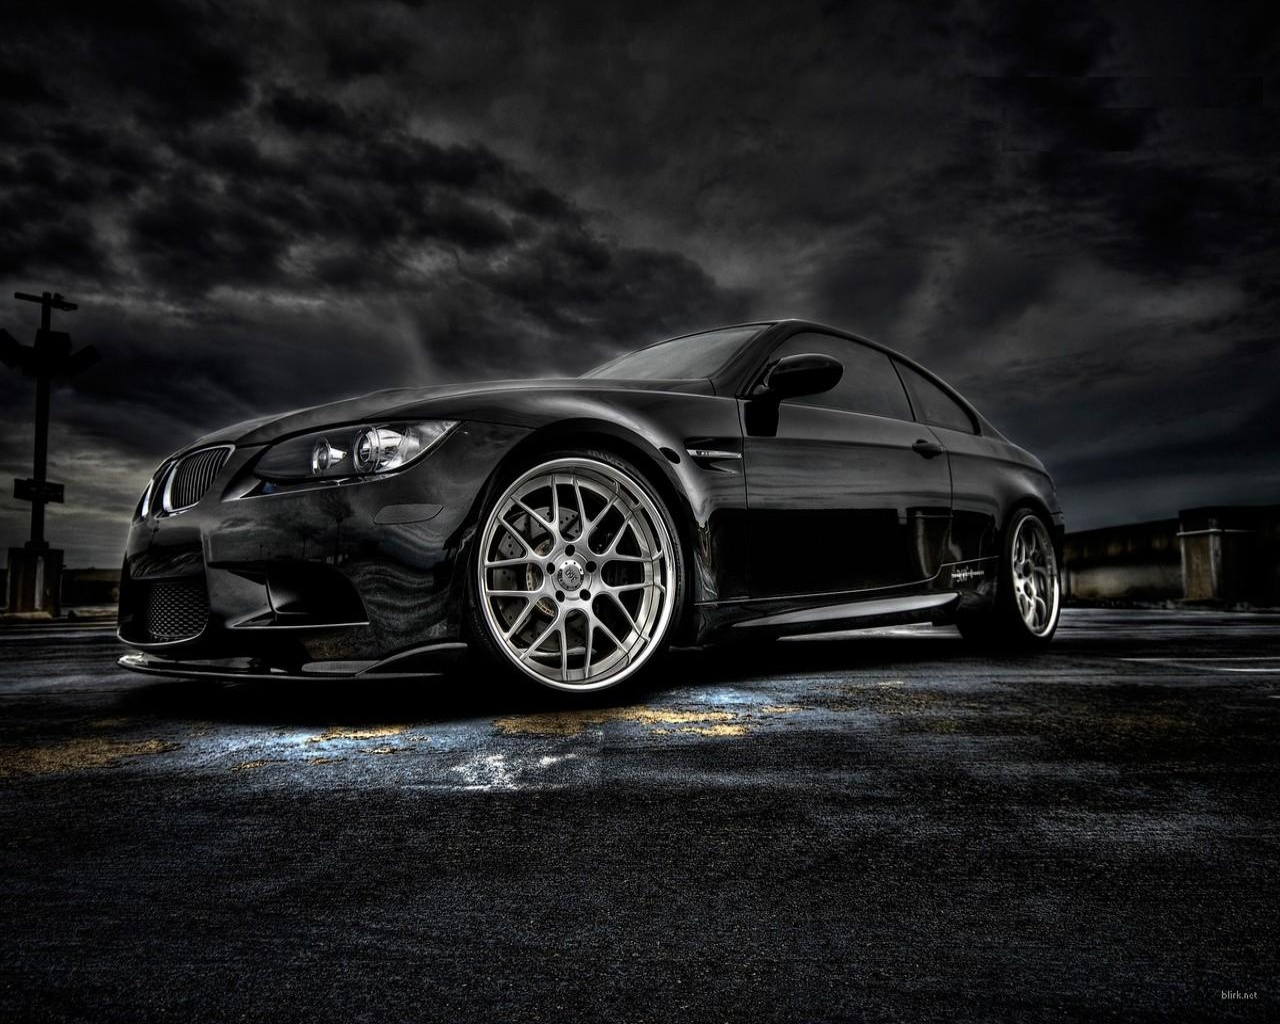 Bmw M3 Widescreen HD Wallpaper For Fb Cover